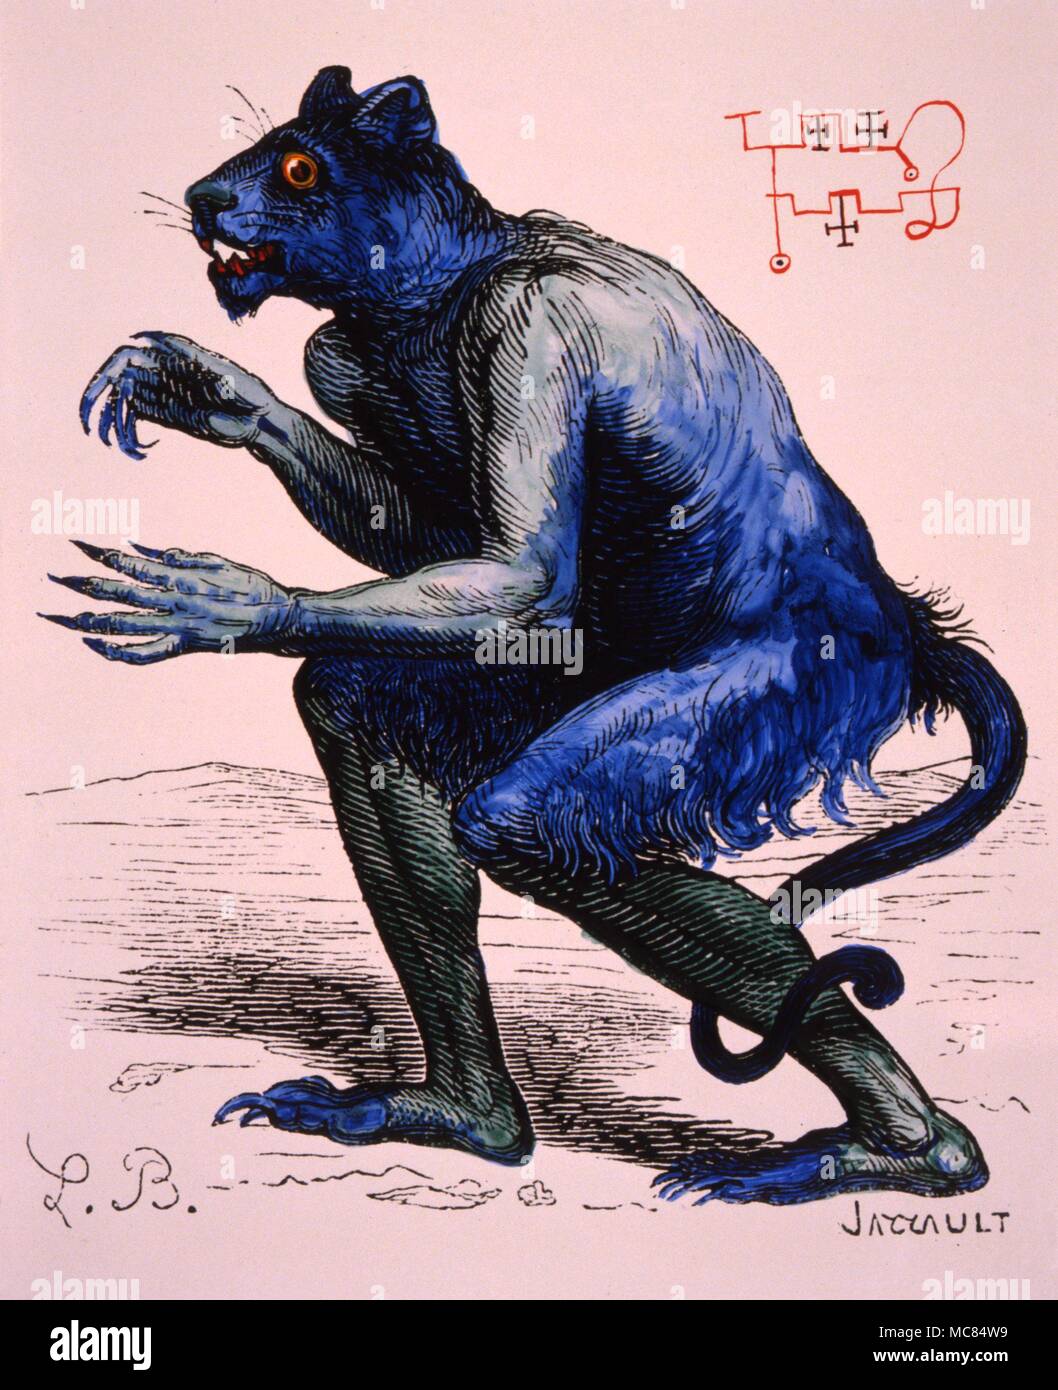 The demon Flauros, leopard-headed monster, conjured for his knowledge of the future. Behind his back is his traditional sigil, or demonic signature. From Collin de Plancy, 'Dictionnaire Infernal' [1863]. Stock Photo